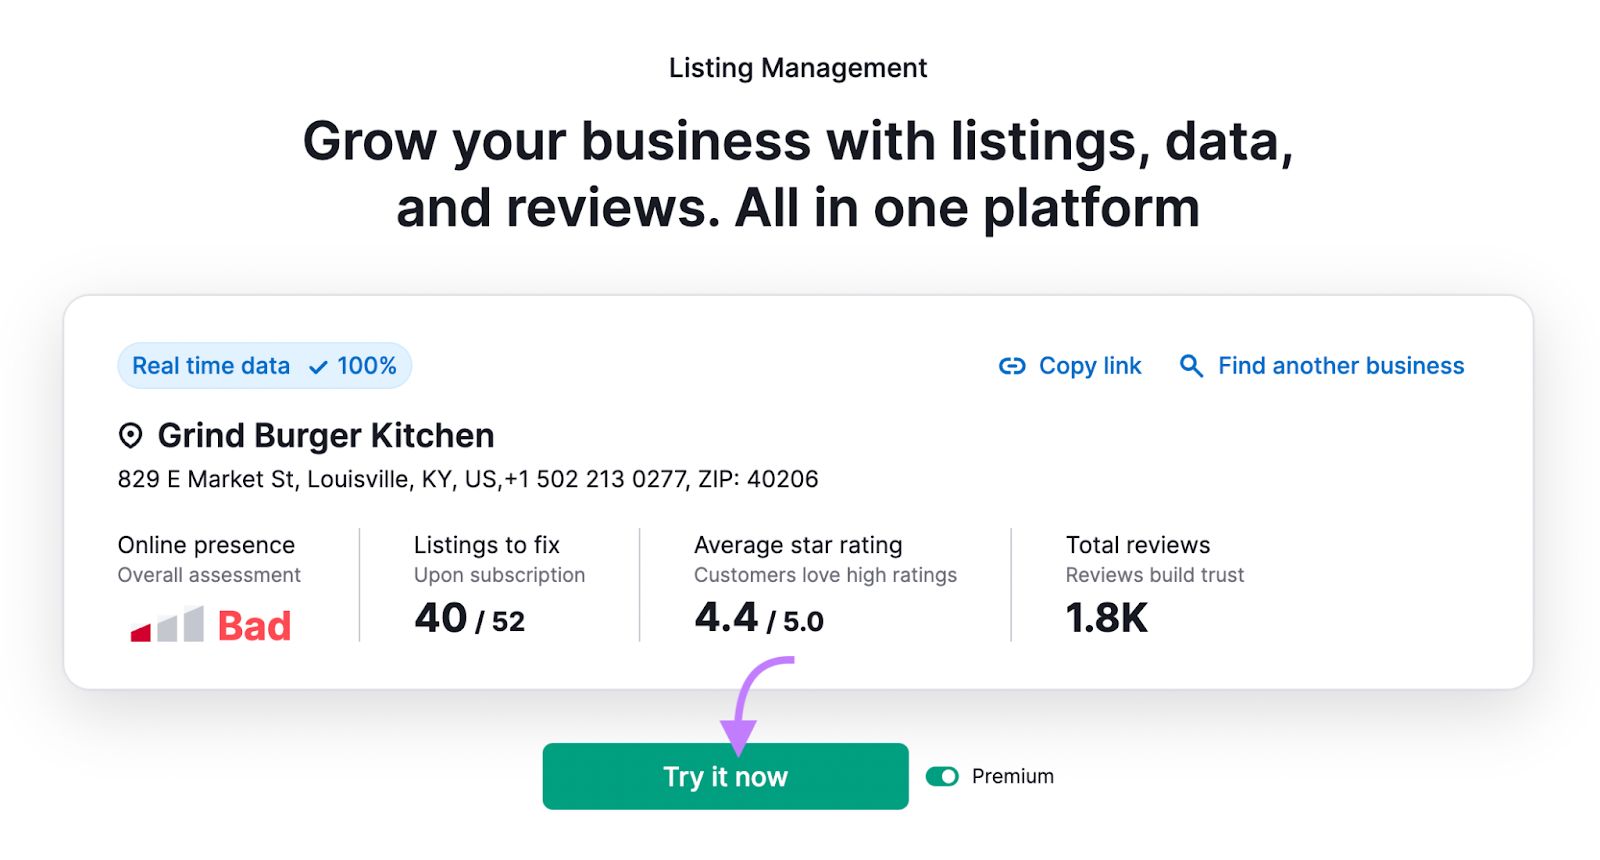 "Try it now" green button under Listing Management tool results